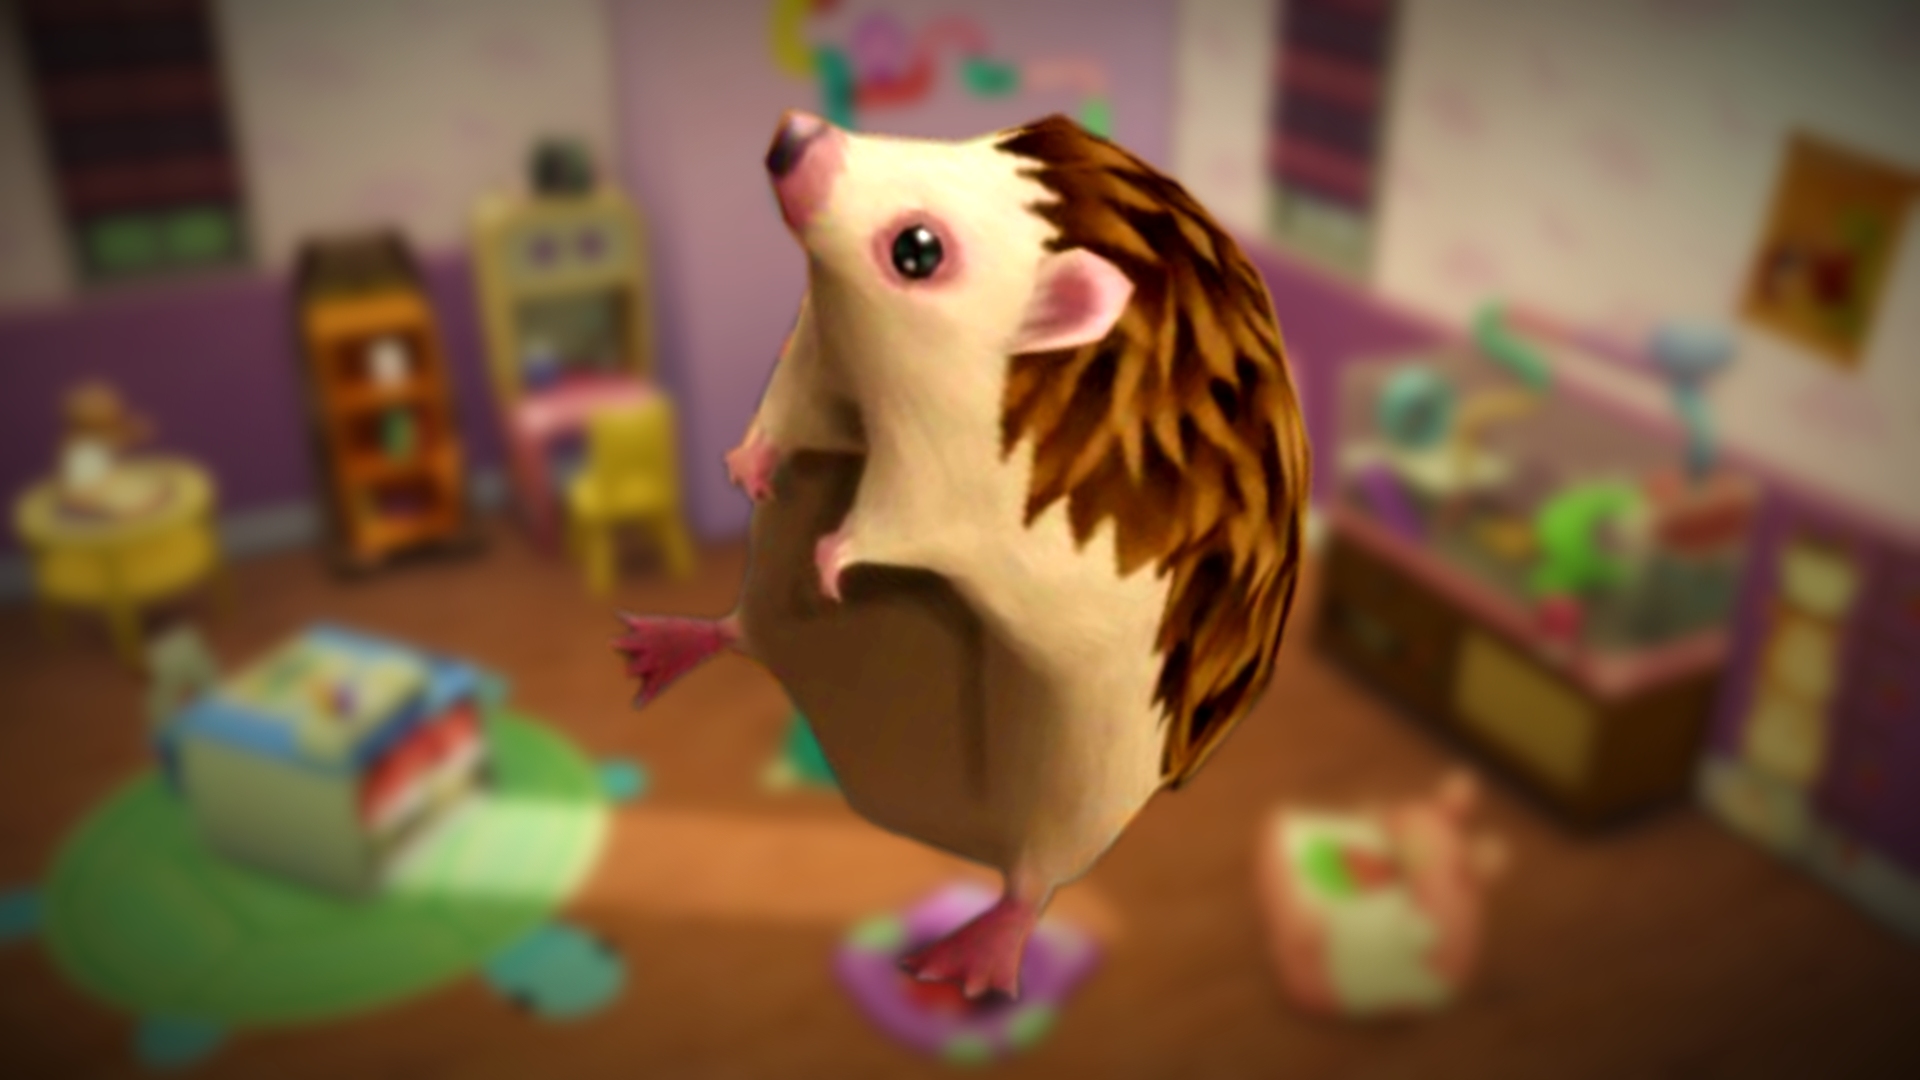 PC Cheats - The Sims 2: Pets Guide - IGN